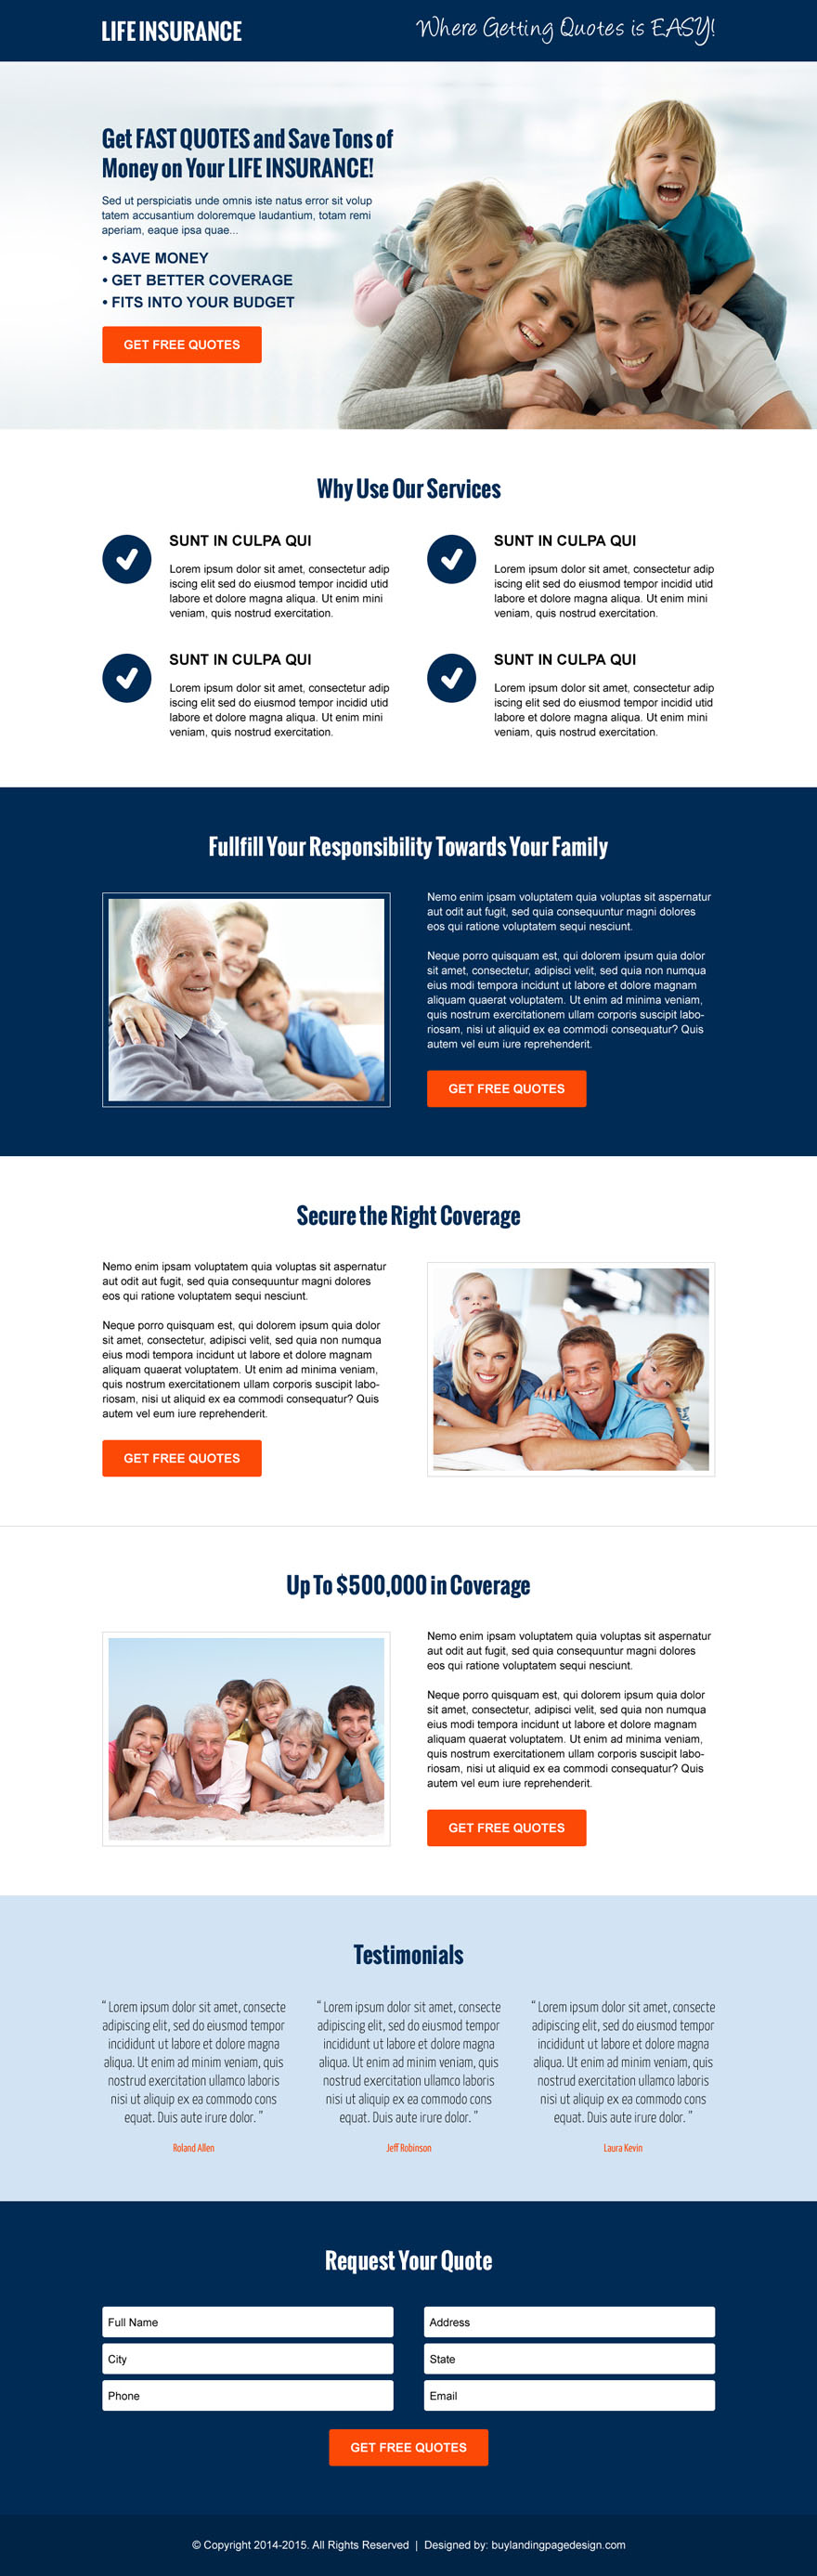 money-saving-life-insurance-quote-cta-and-lead-capture-landing-page-design-template-014